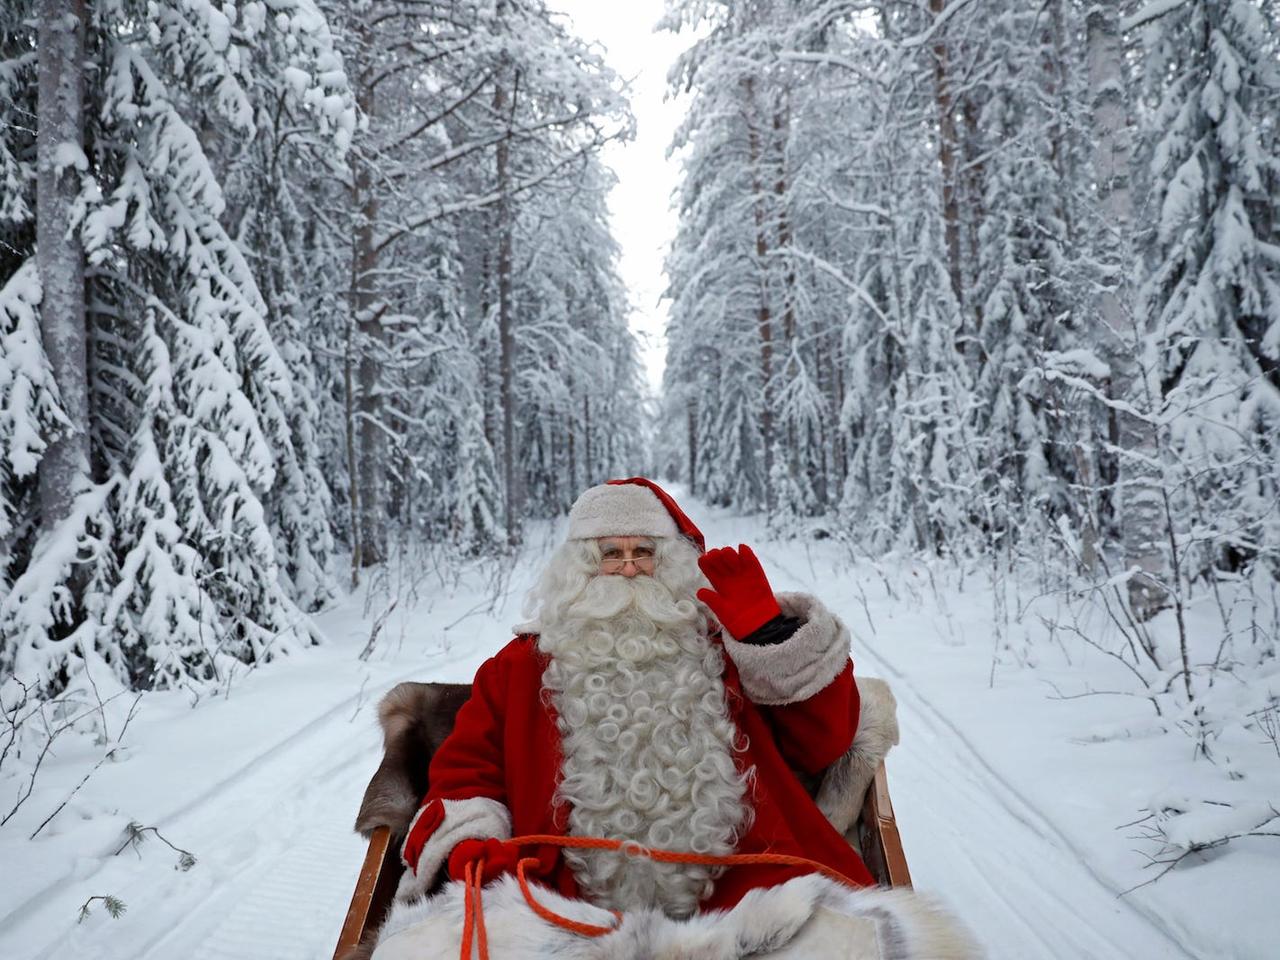 Santa is always ready for Christmas at his office in Finland.